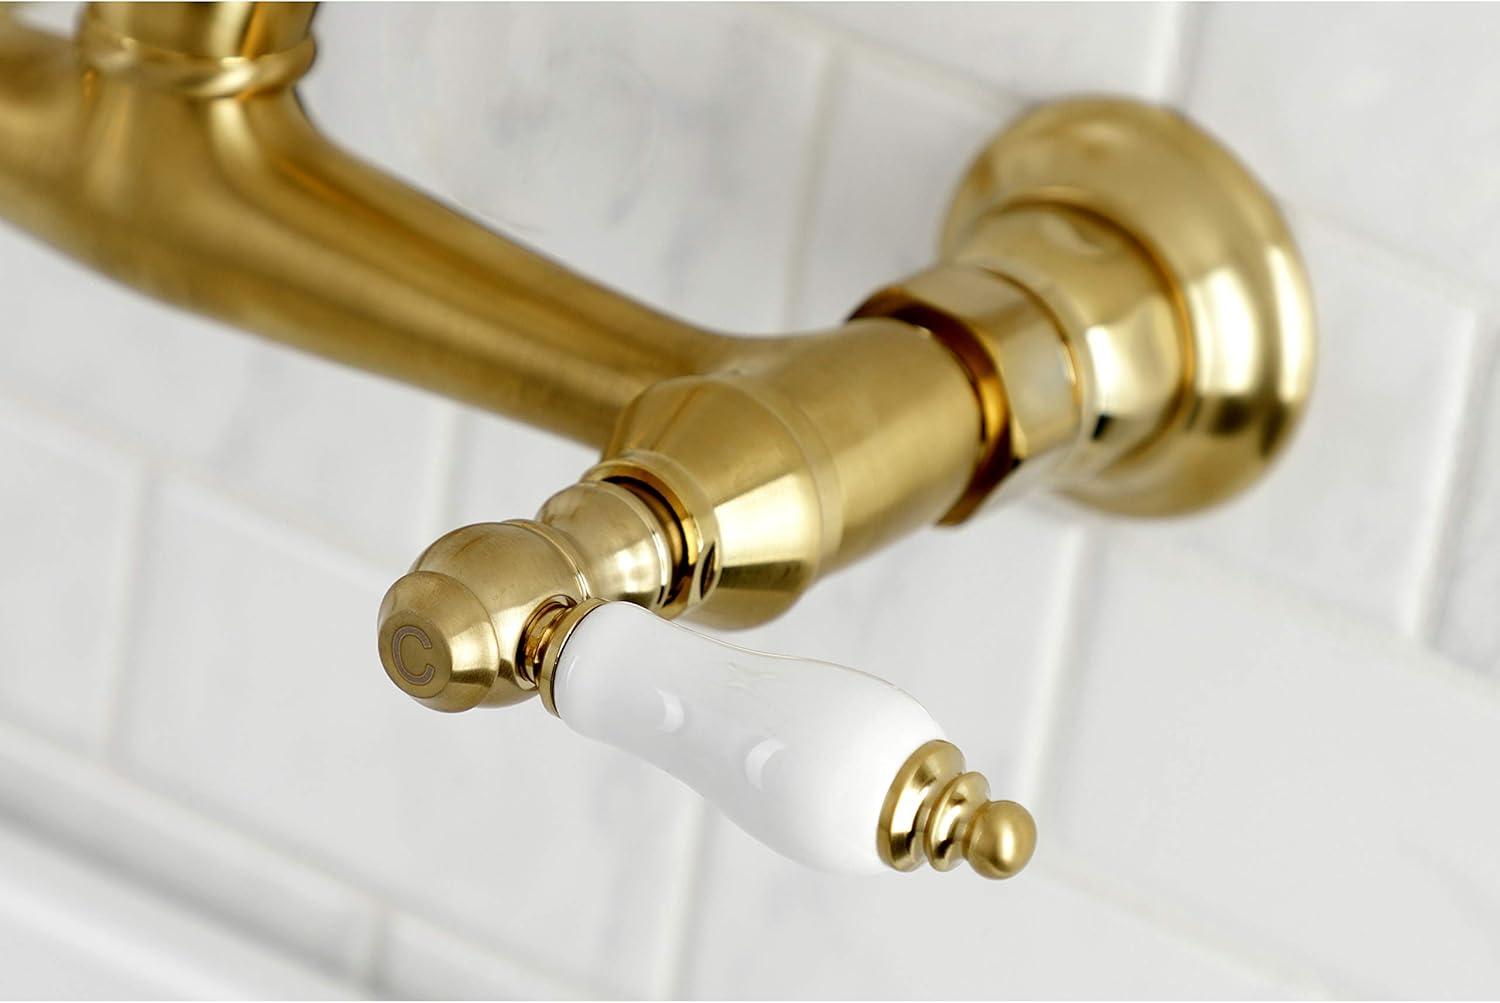 Vintage Brushed Brass Wall Mount Bathroom Faucet with Lever Handles